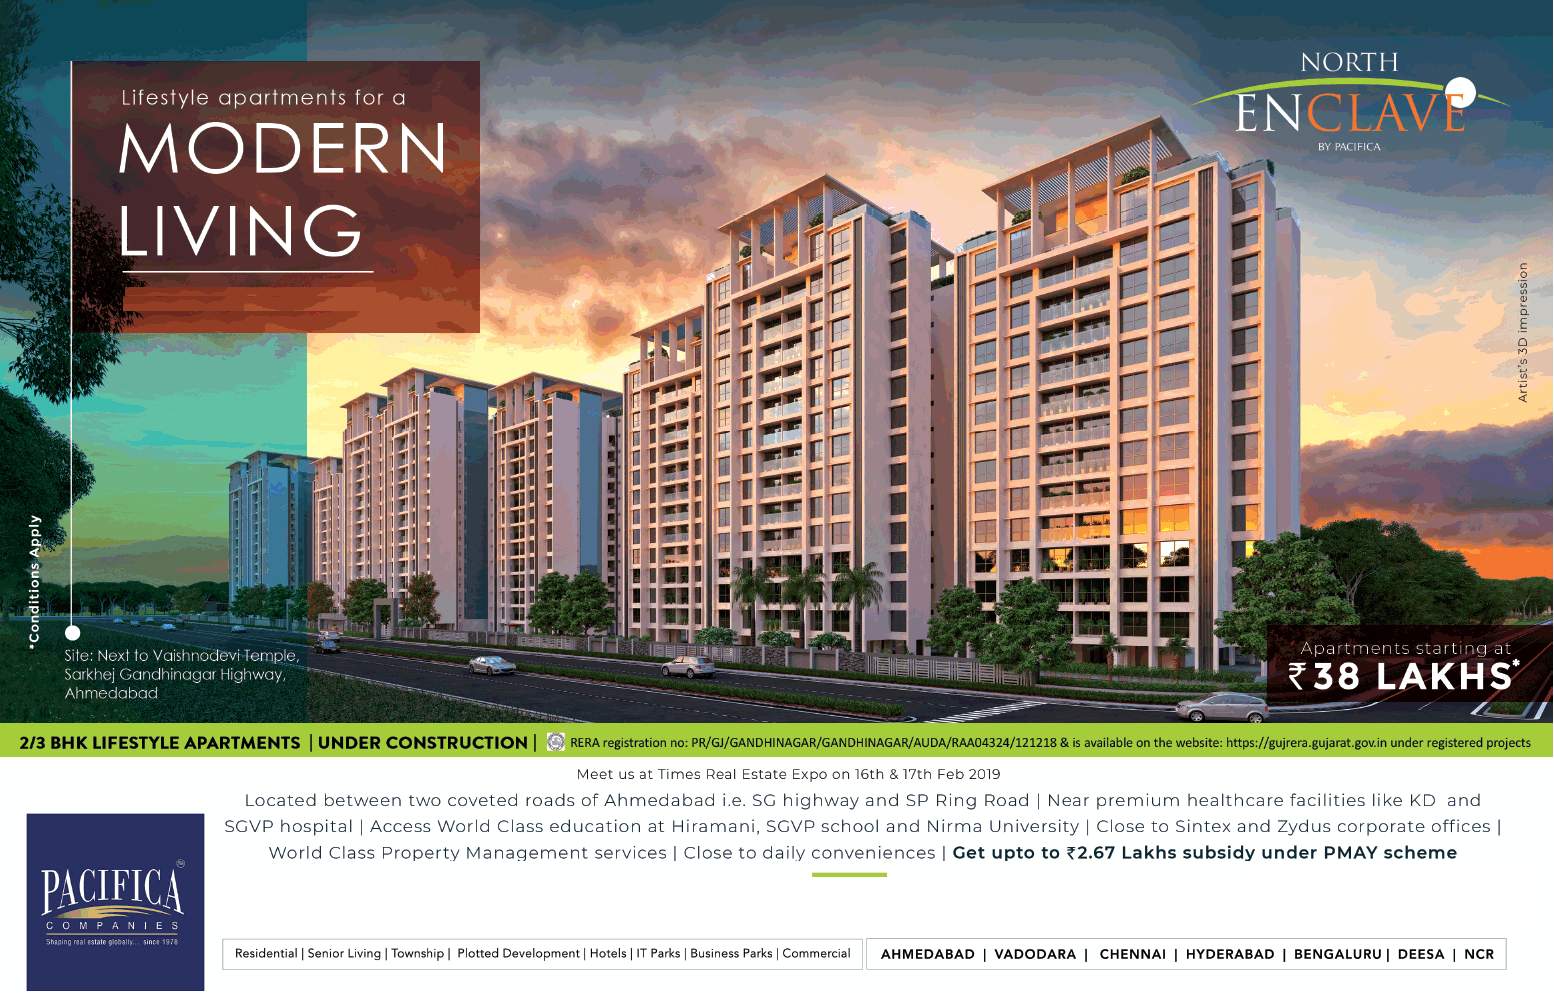 Get upto to Rs 2.67 Lakhs subsidy under PMAY scheme at Pacifica North Enclave, Ahmedabad